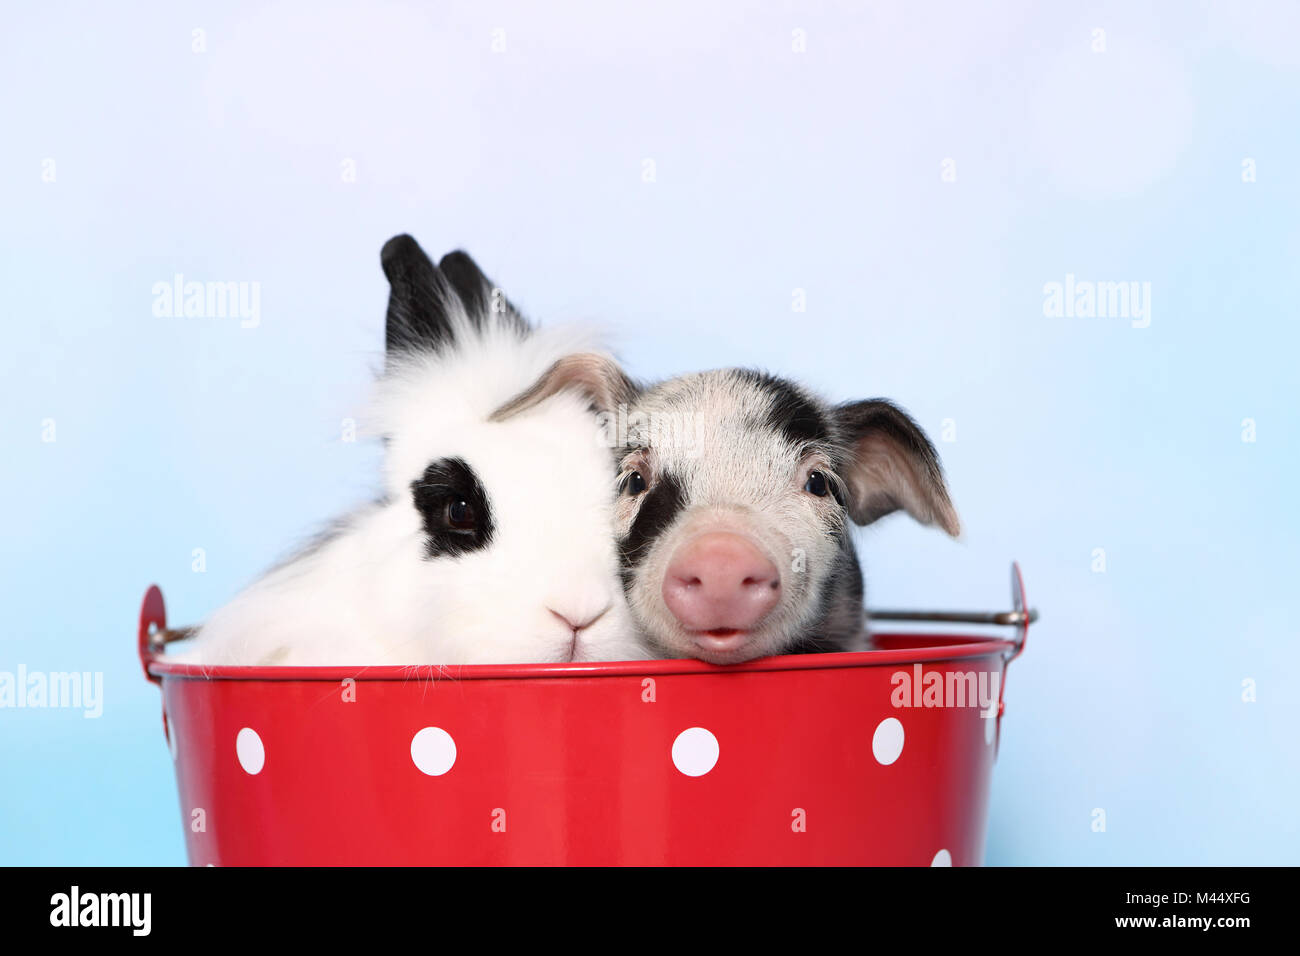 Domestic Pig, Turopolje x ?. Piglet (1 week old) and Teddy Dwarf Rabbit sitting in a big red bucket with white polka dots. Studio picture against a lightblue background. Germany Stock Photo